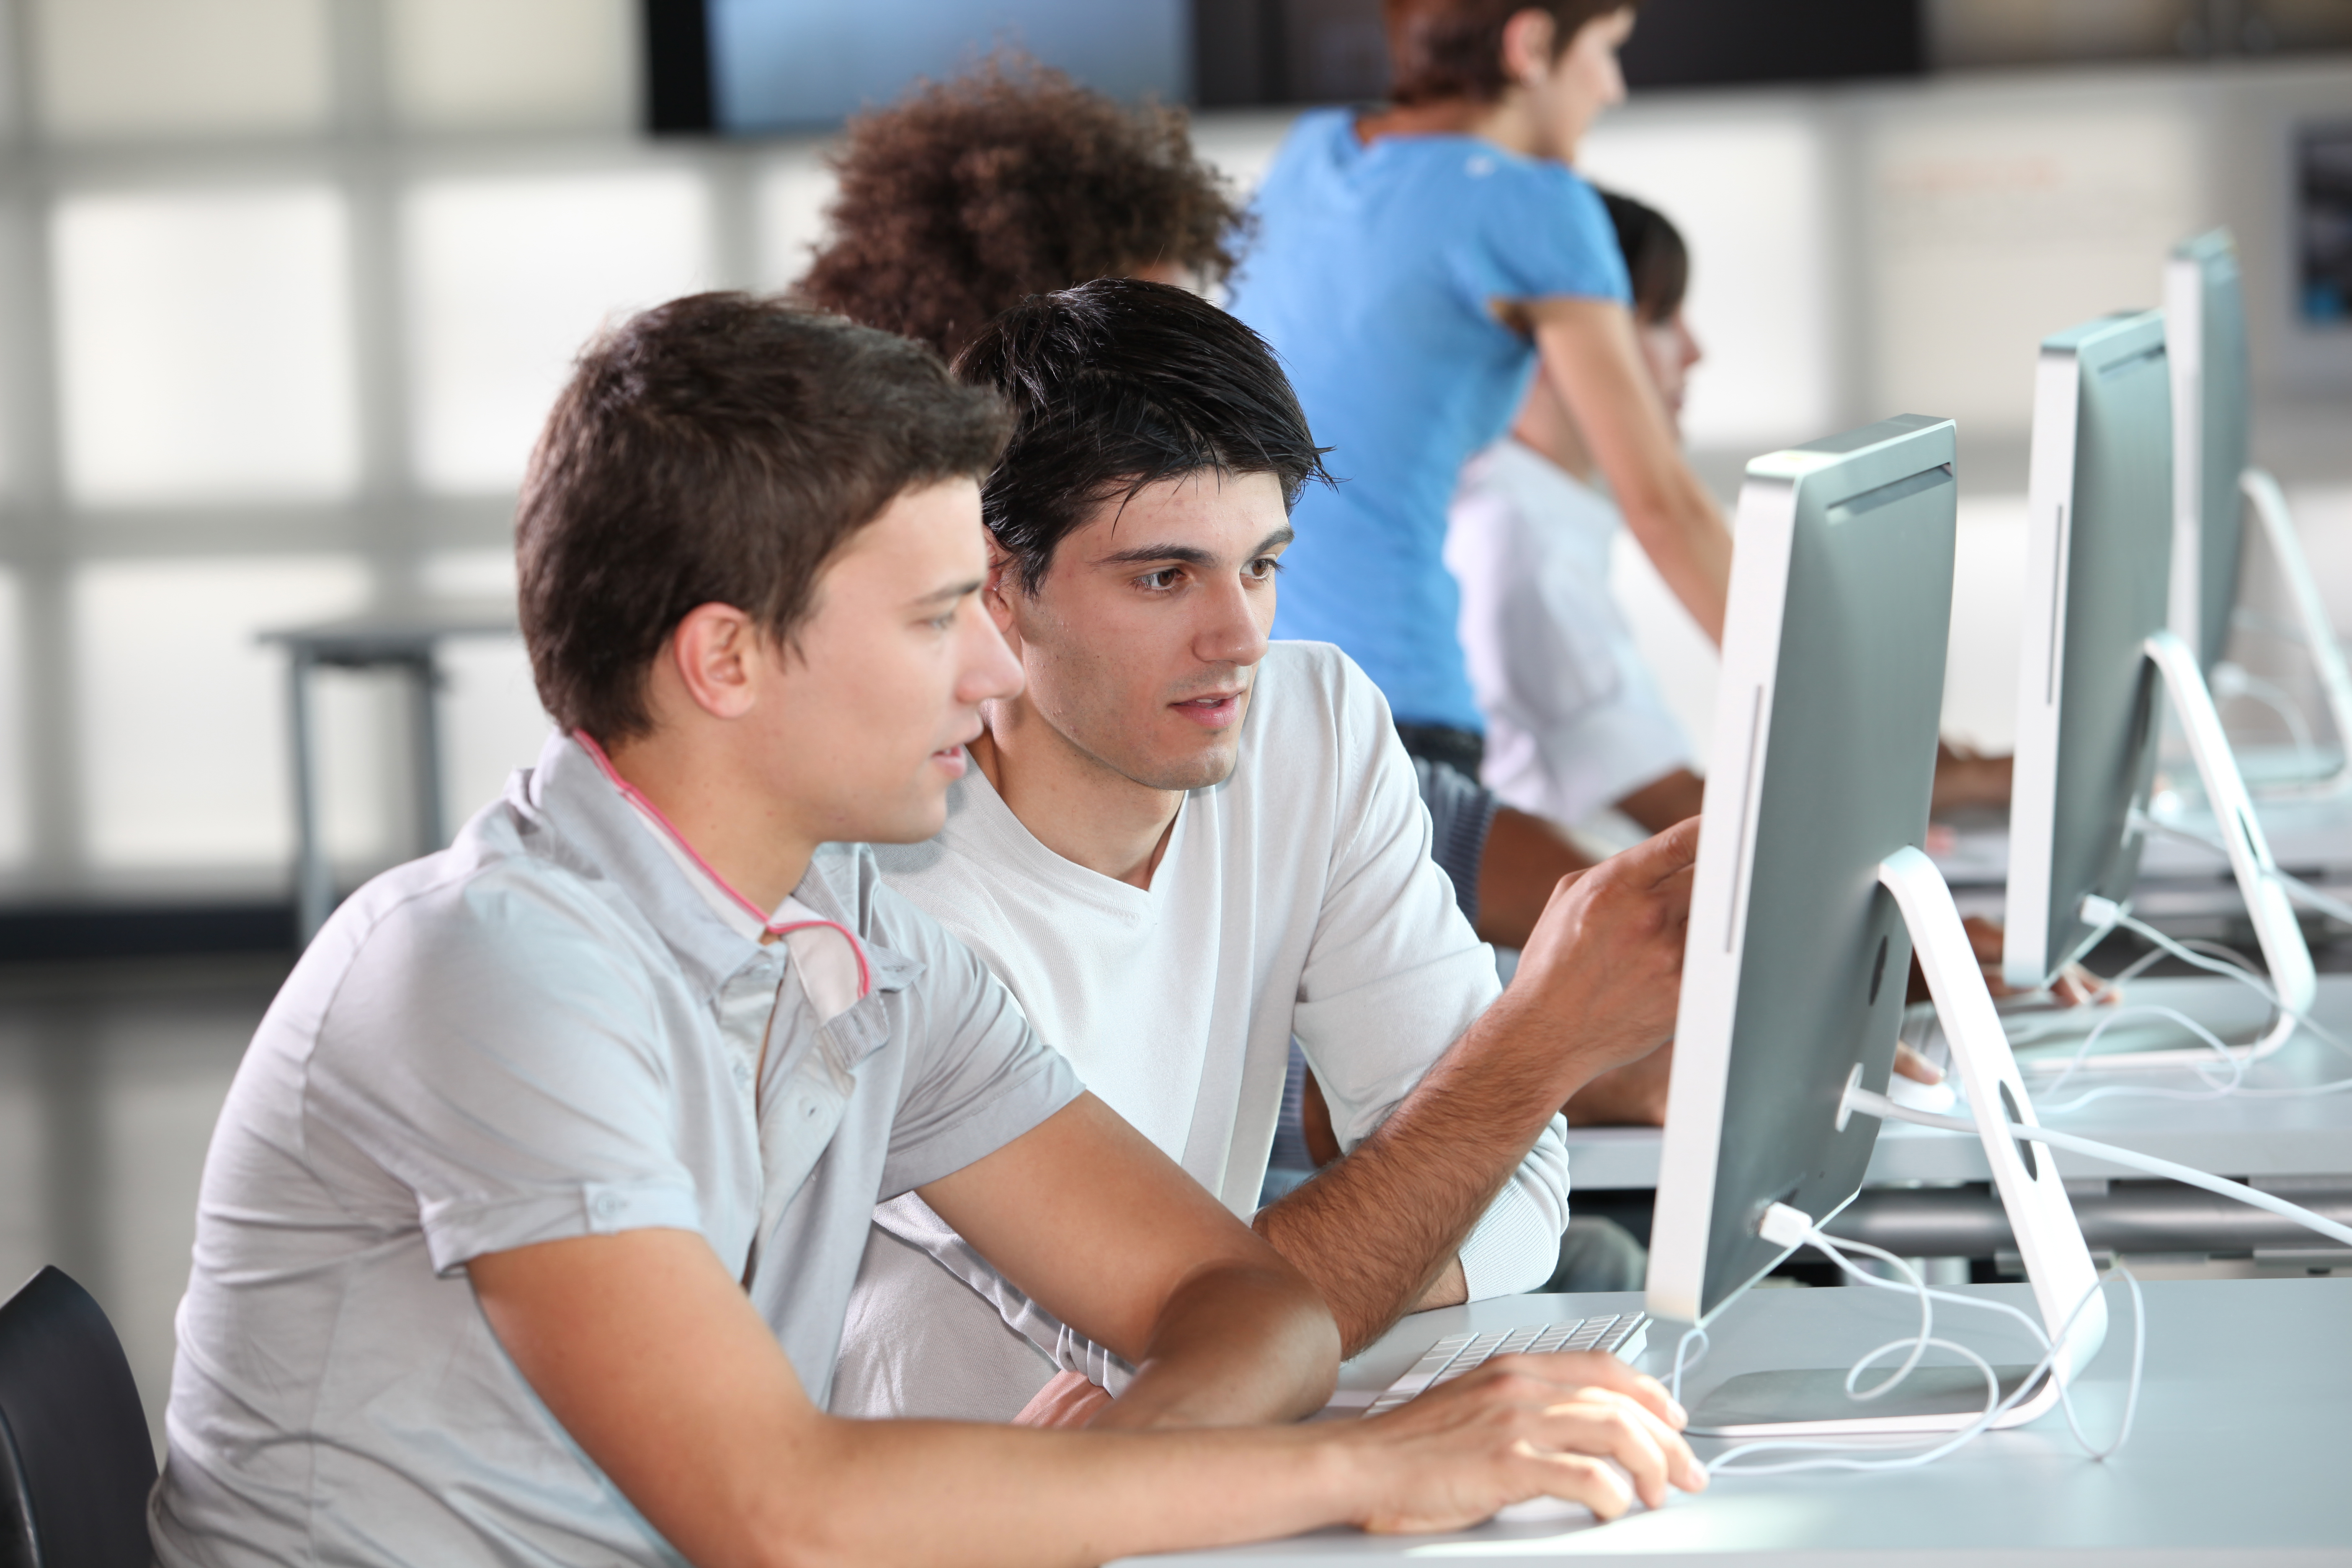 Blended Learning in the classroom